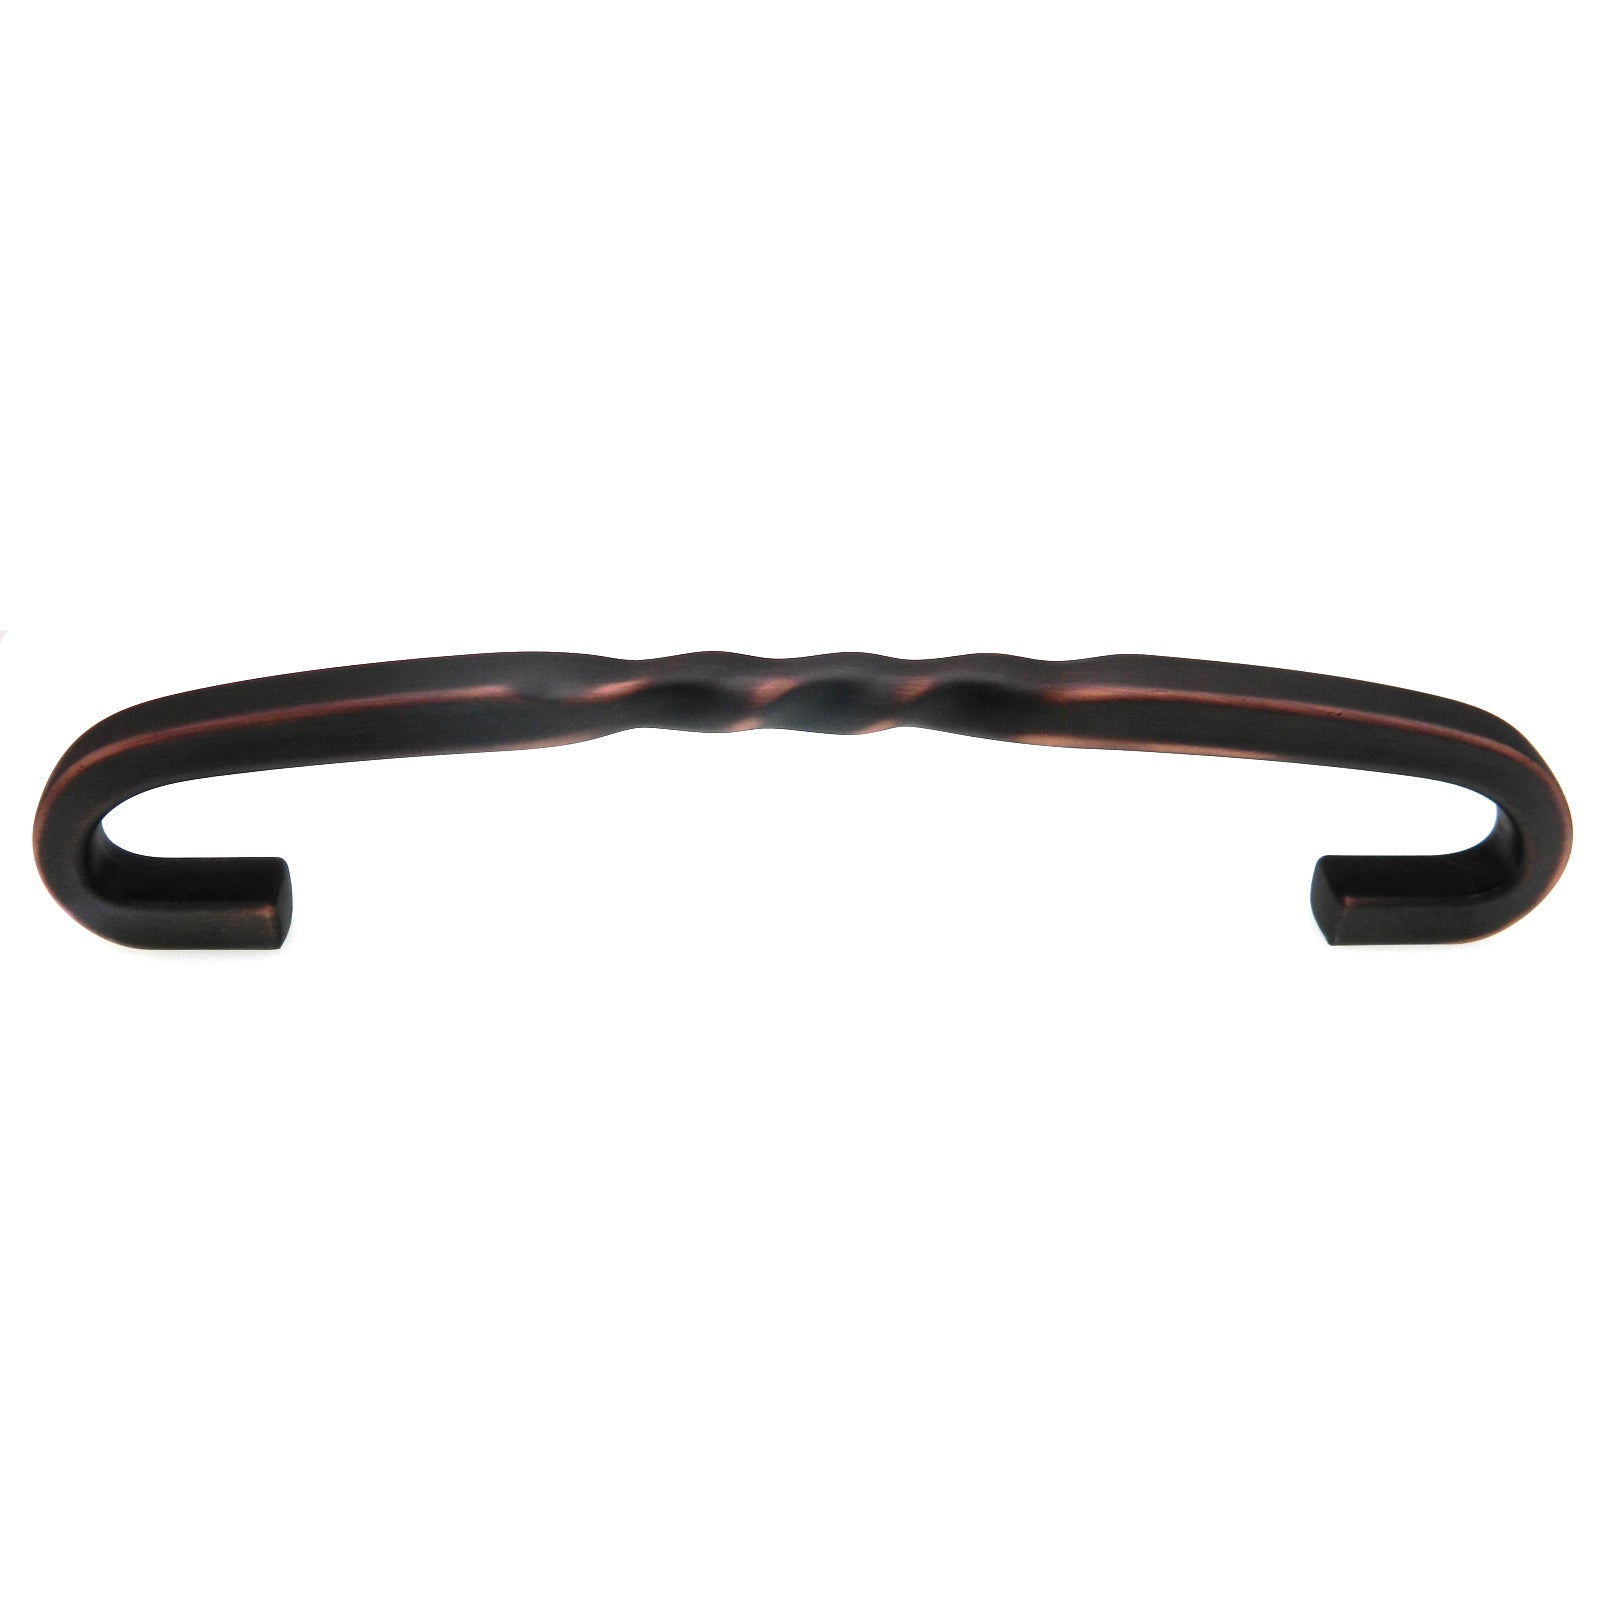 Amerock Inspirations Oil-Rubbed Bronze 8" Ctr. Cabinet Appliance Pull BP54000ORB